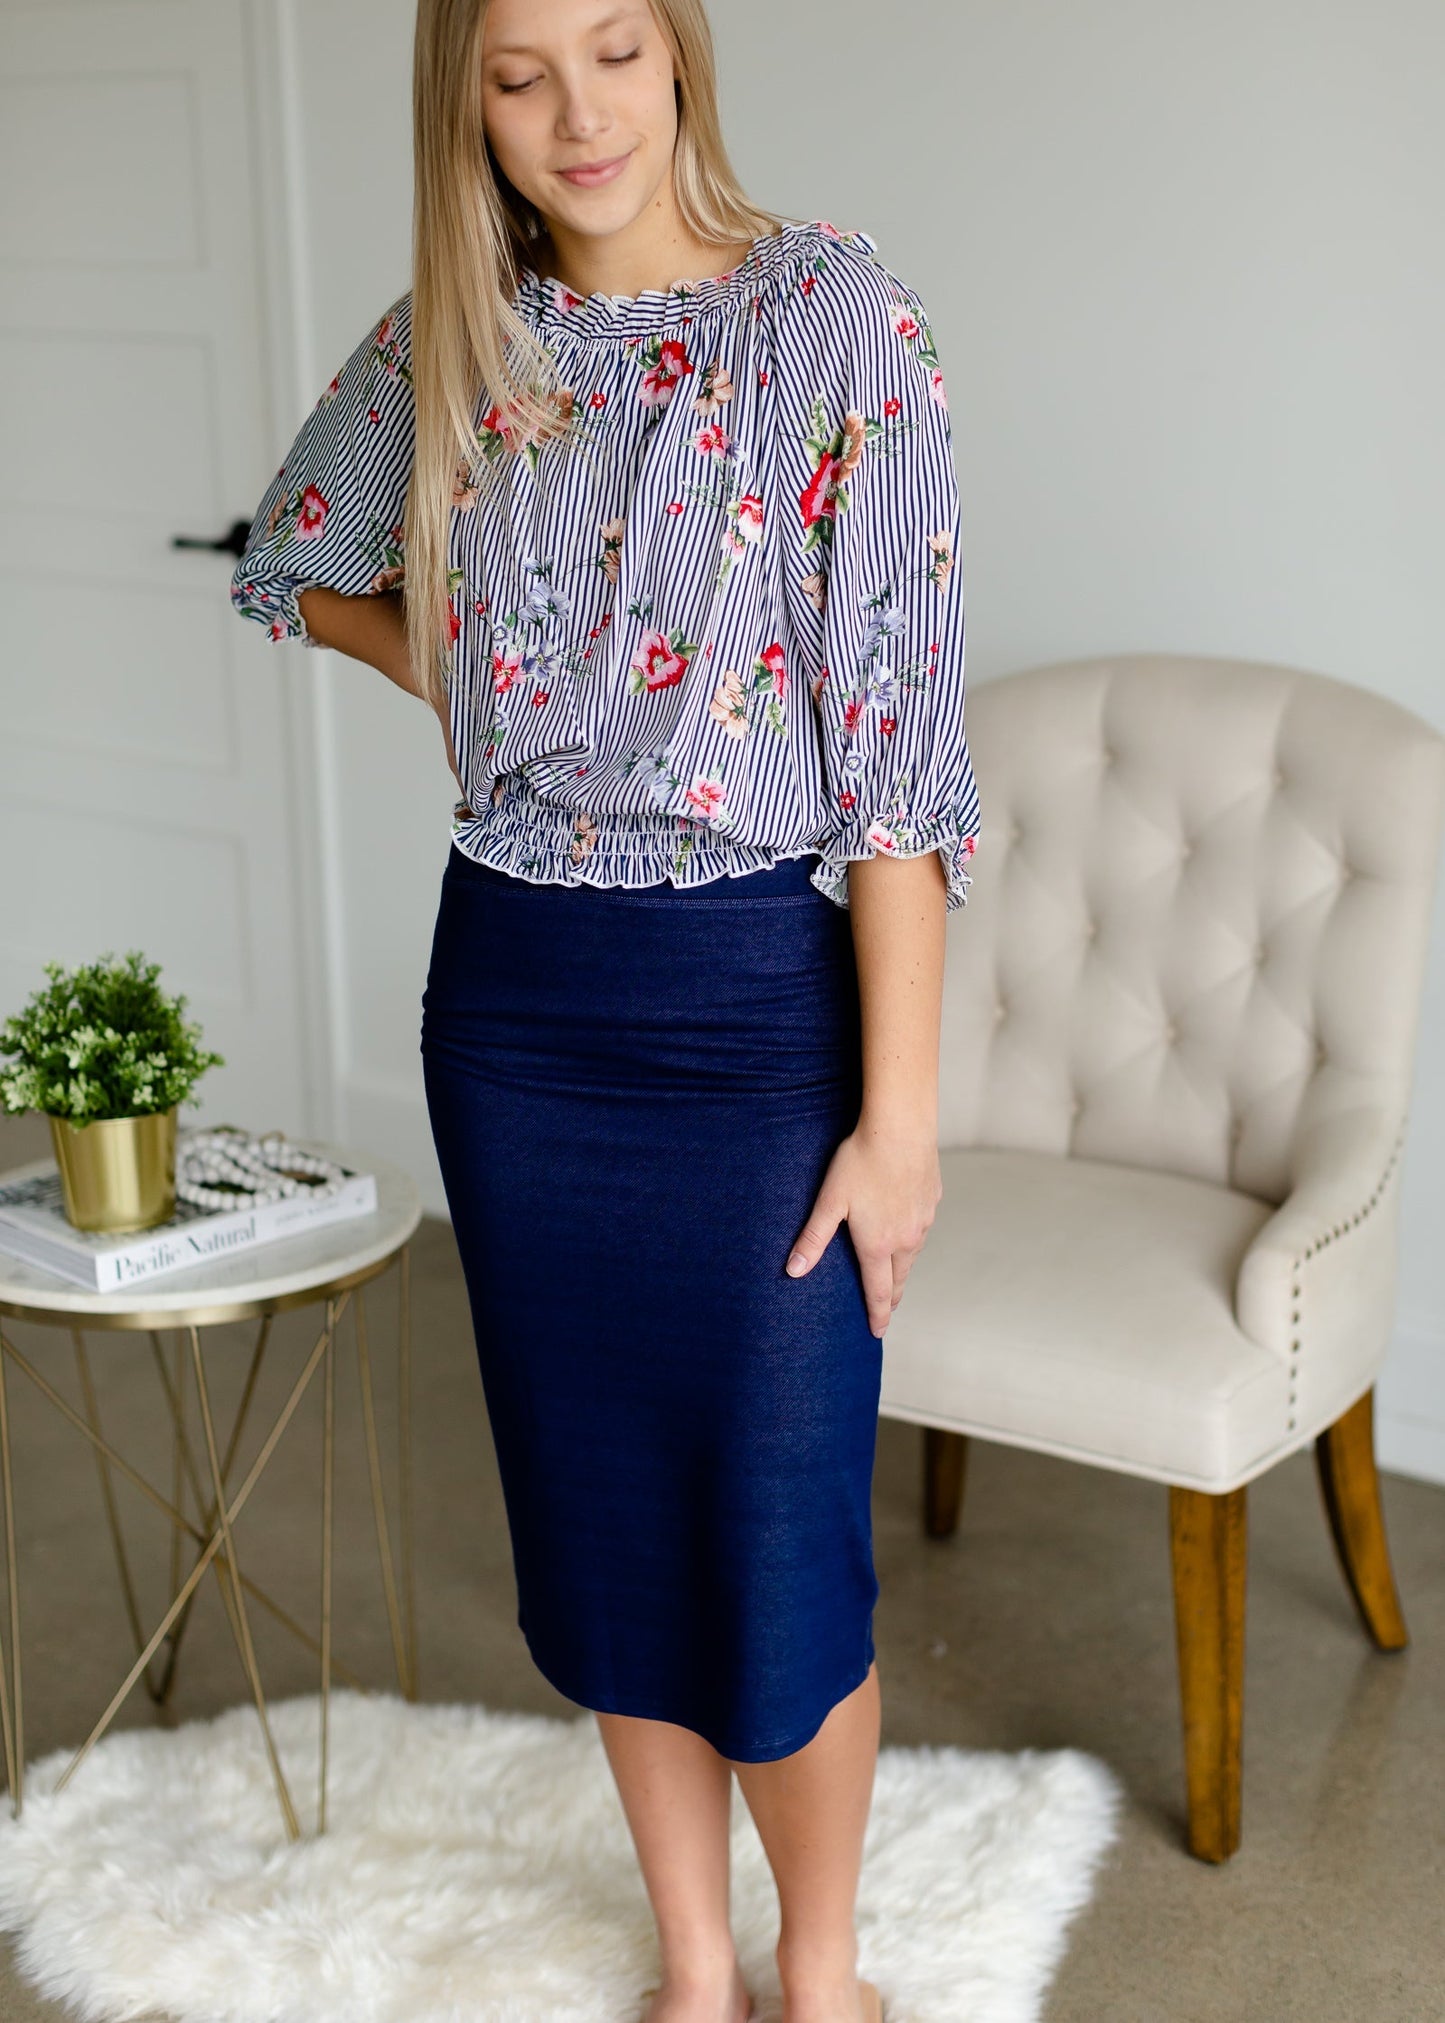 Navy Floral Striped Smocked Top - FINAL SALE Tops